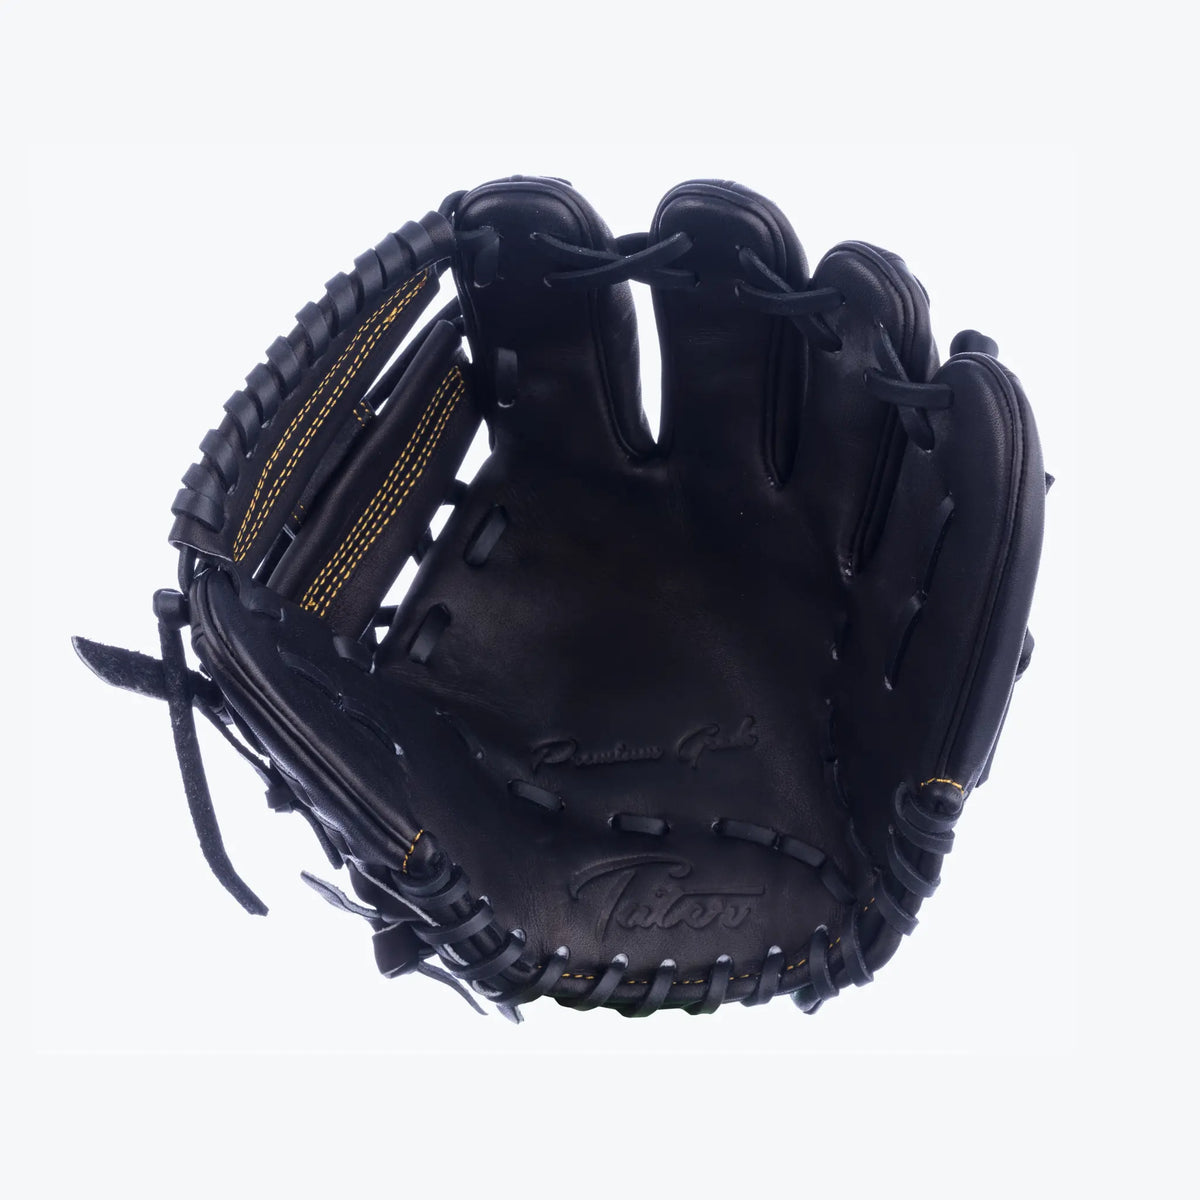 Explore the intricate design of Tater Baseball&#39;s black infield training glove, featuring a 9-inch size for focused fielding practice. The glove showcases detailed craftsmanship with gold stitch accents, providing an exceptional look and feel for advanced infield drills.